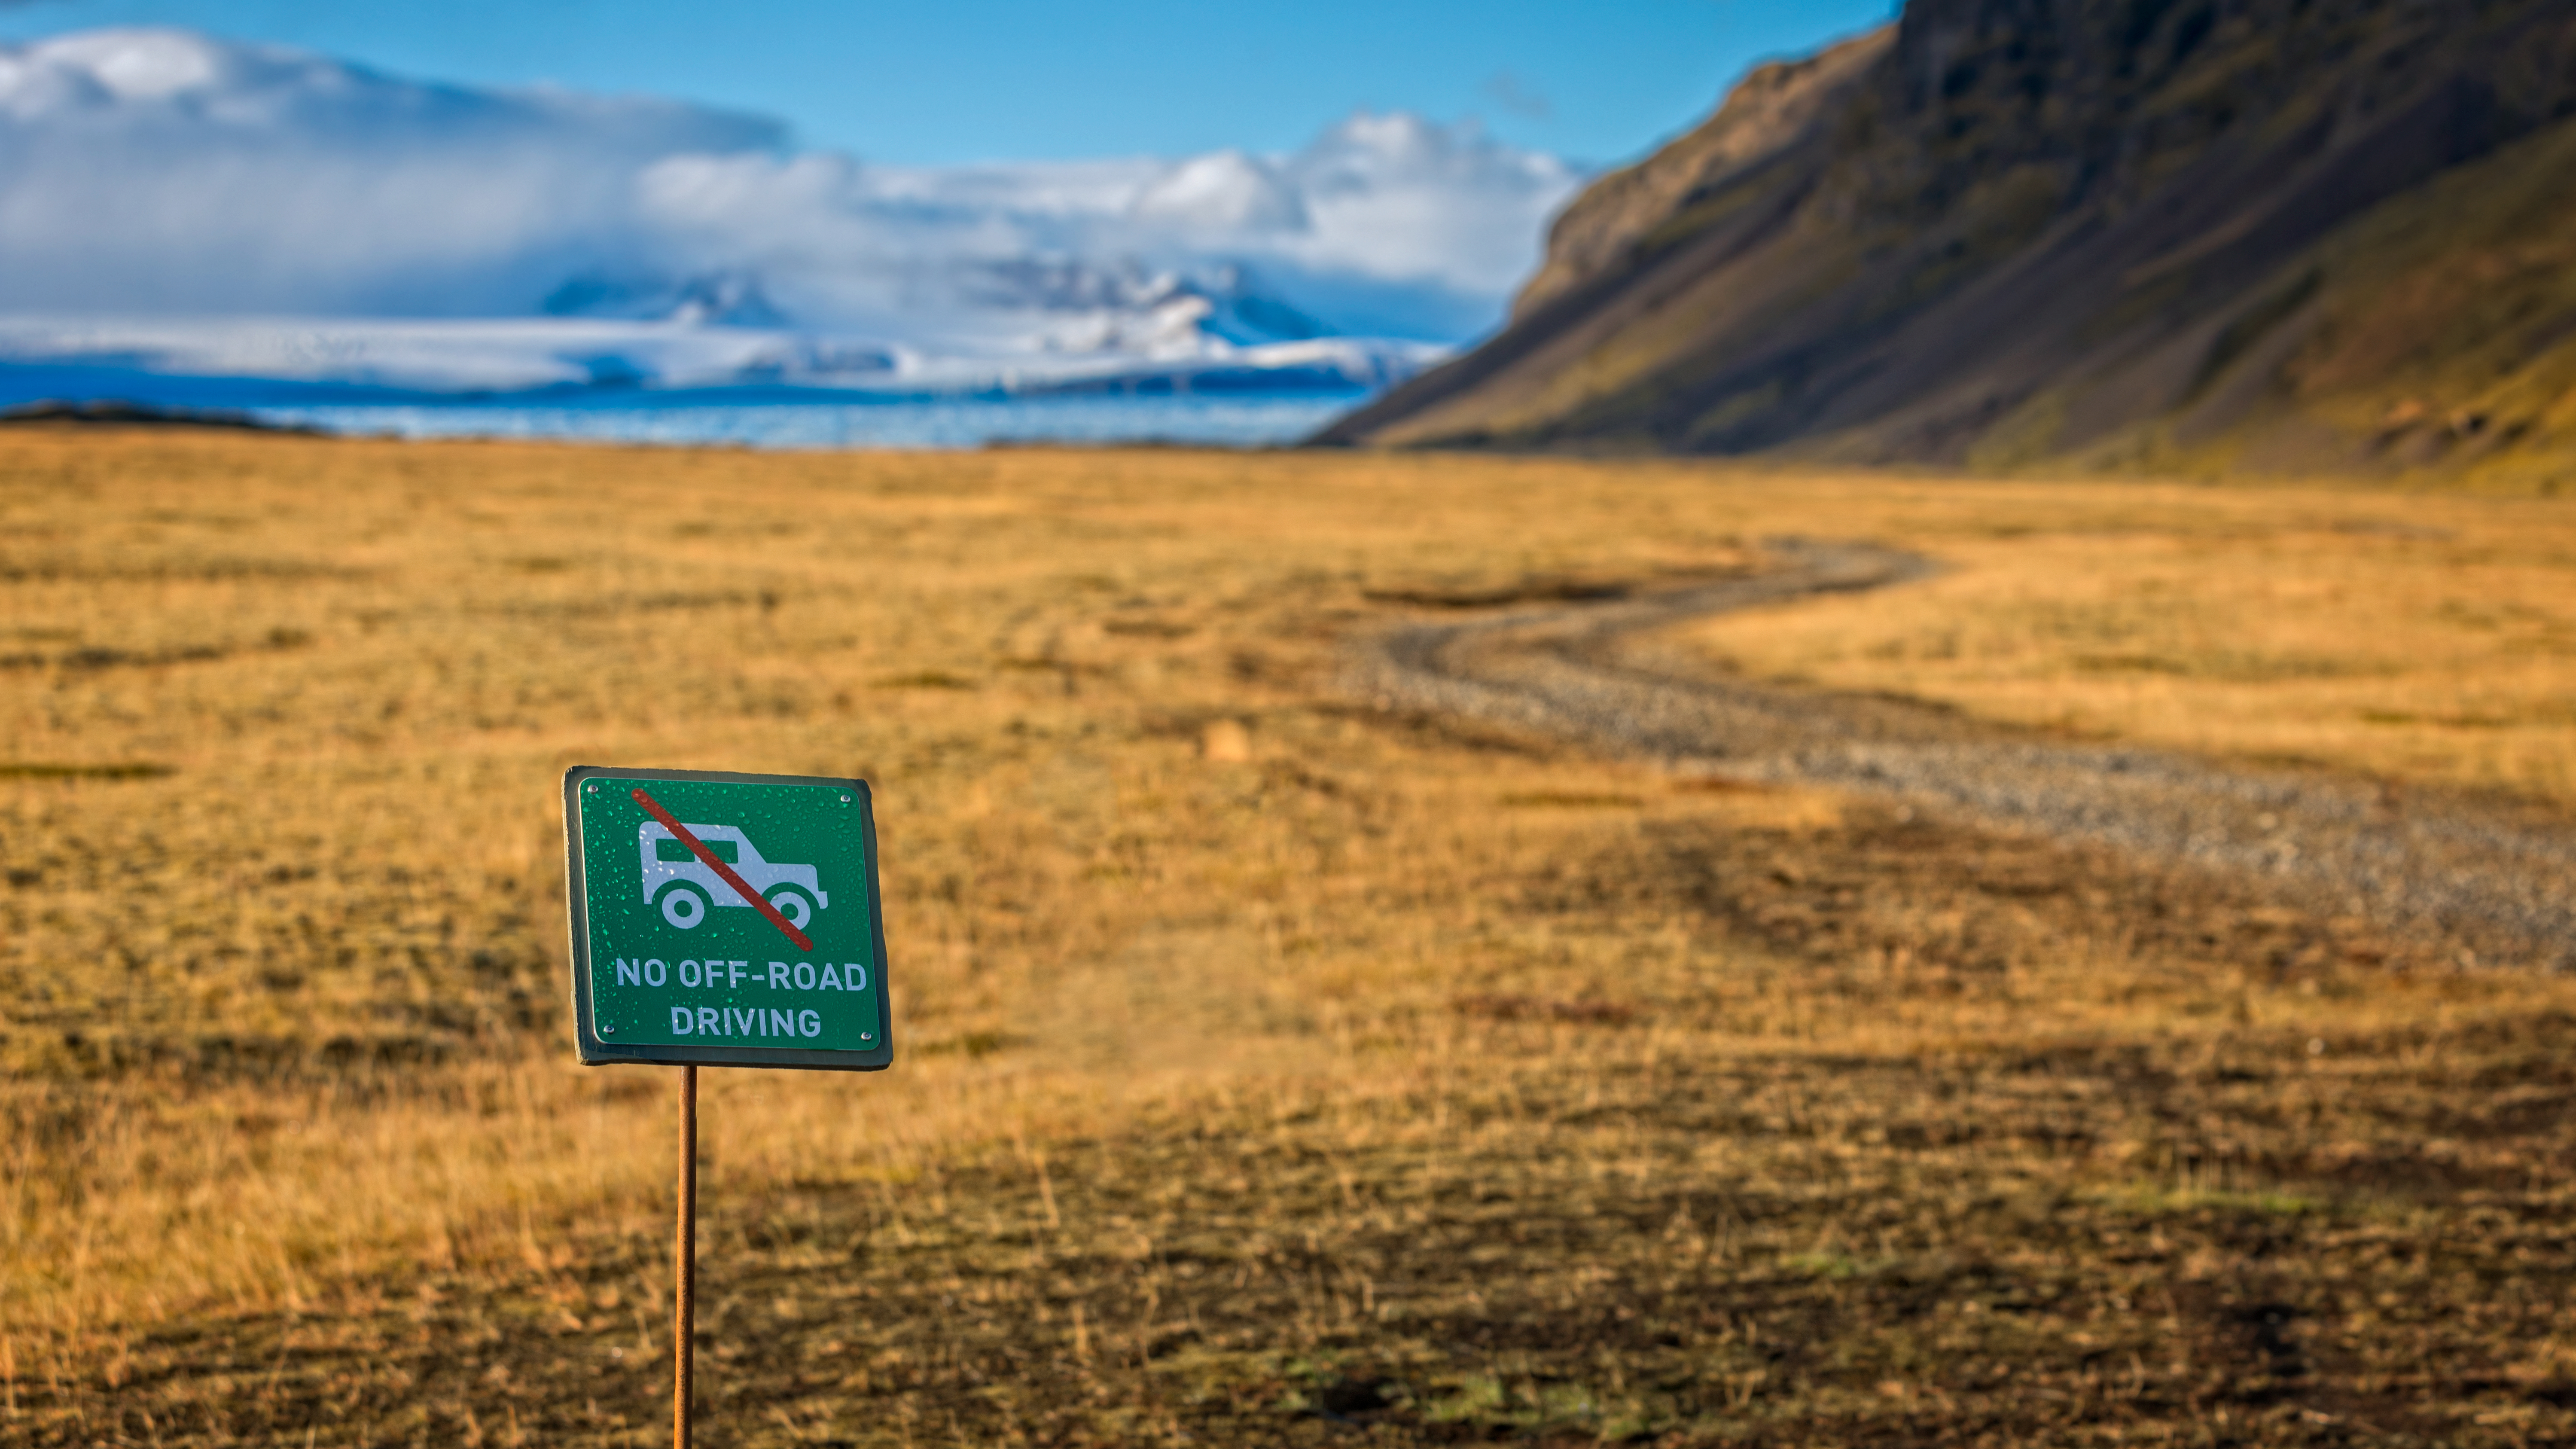 "No Off-Road Driving" sign in Iceland.